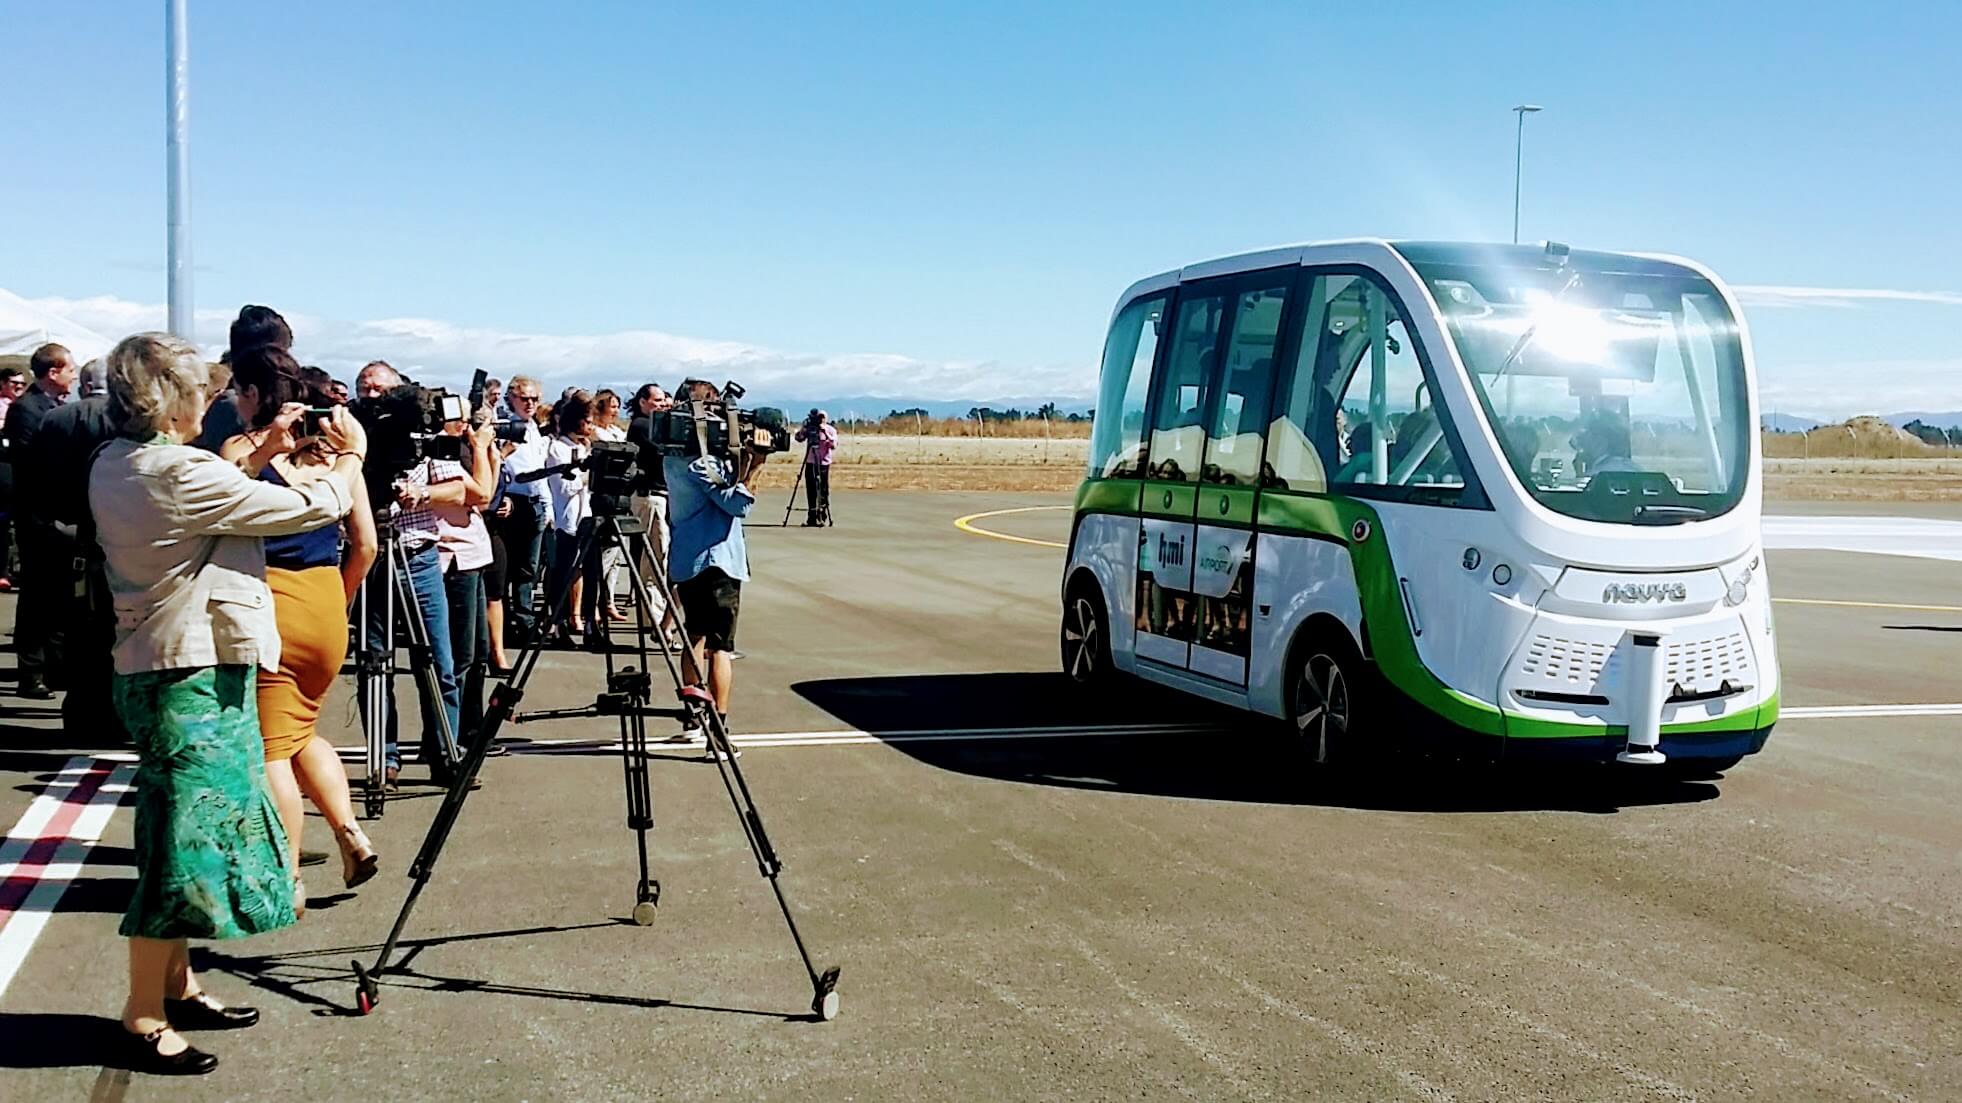 Autonomous Vehicle trial launched in New Zealand by HMI Technologies